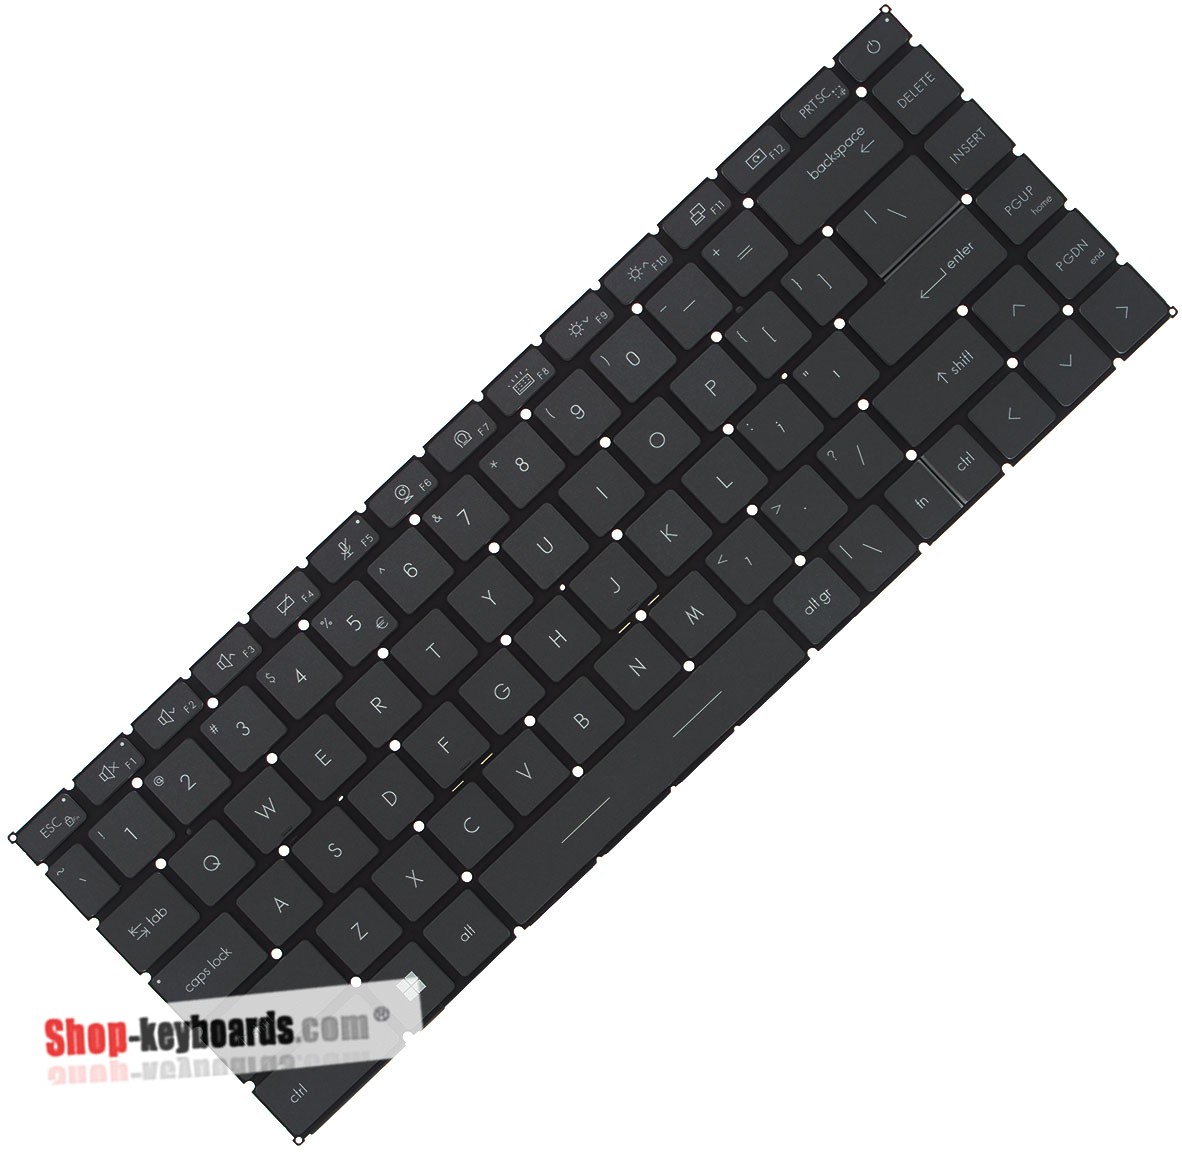 MSI WORKSTATION WS66 10TKT-080  Keyboard replacement